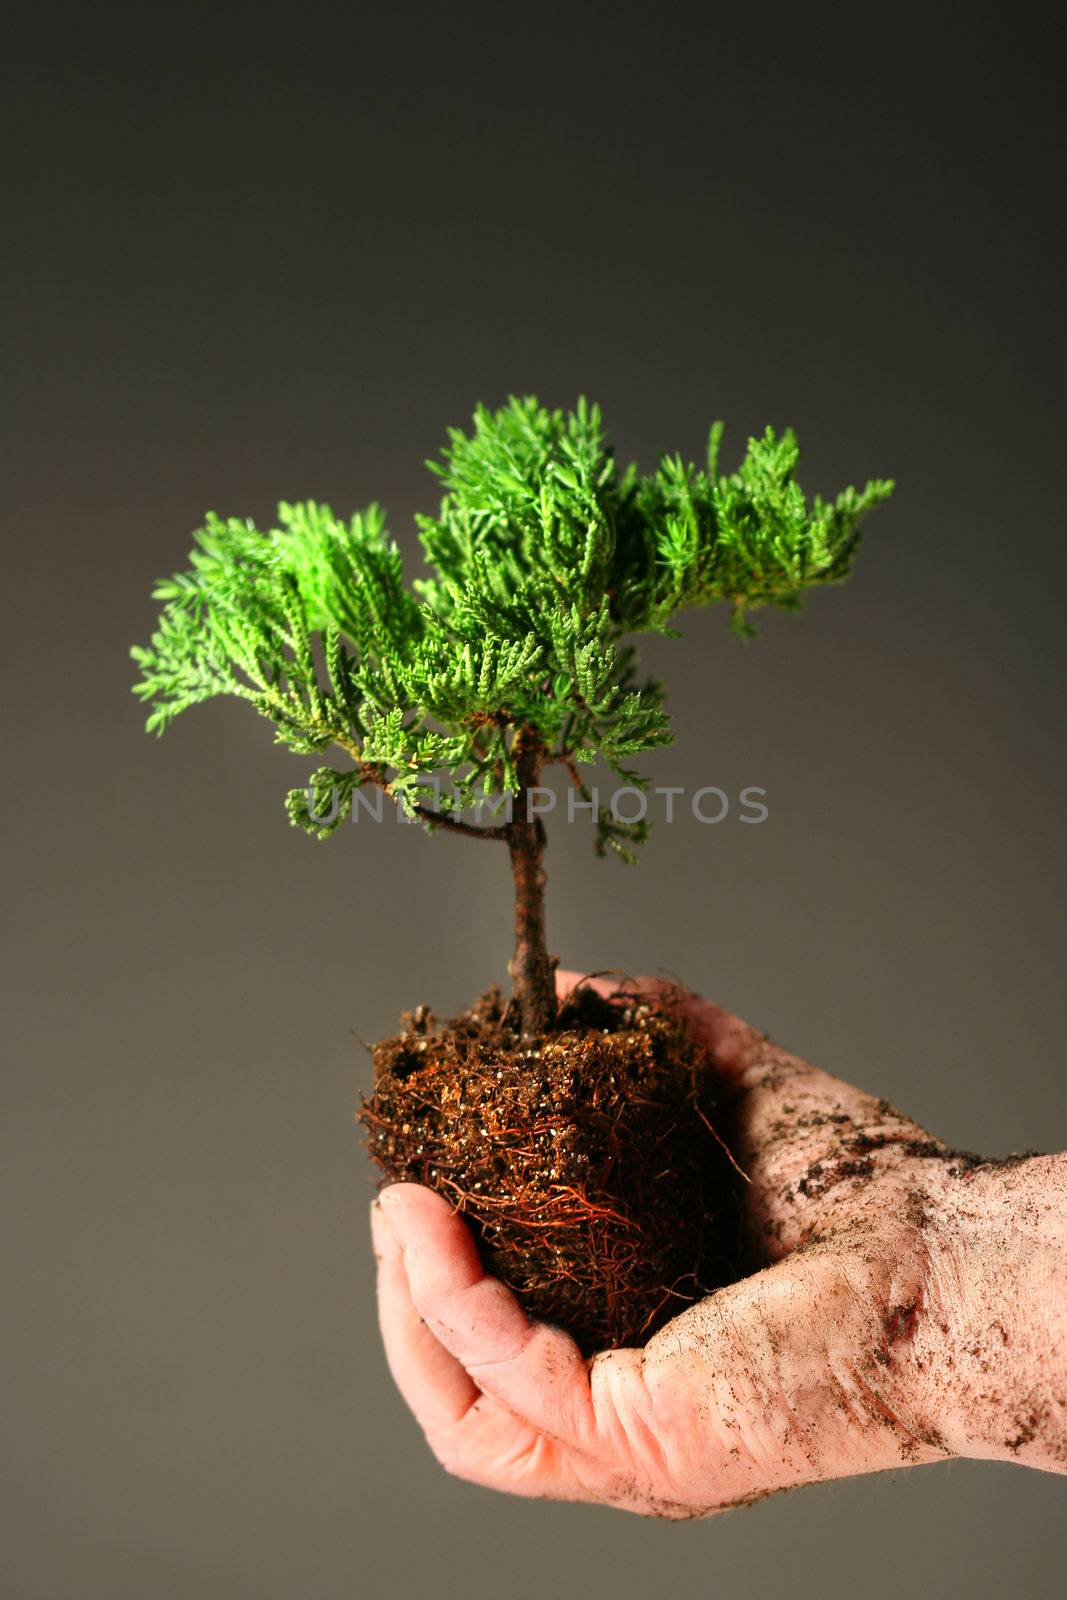 Soiled hand holding a small tree  by Sandralise